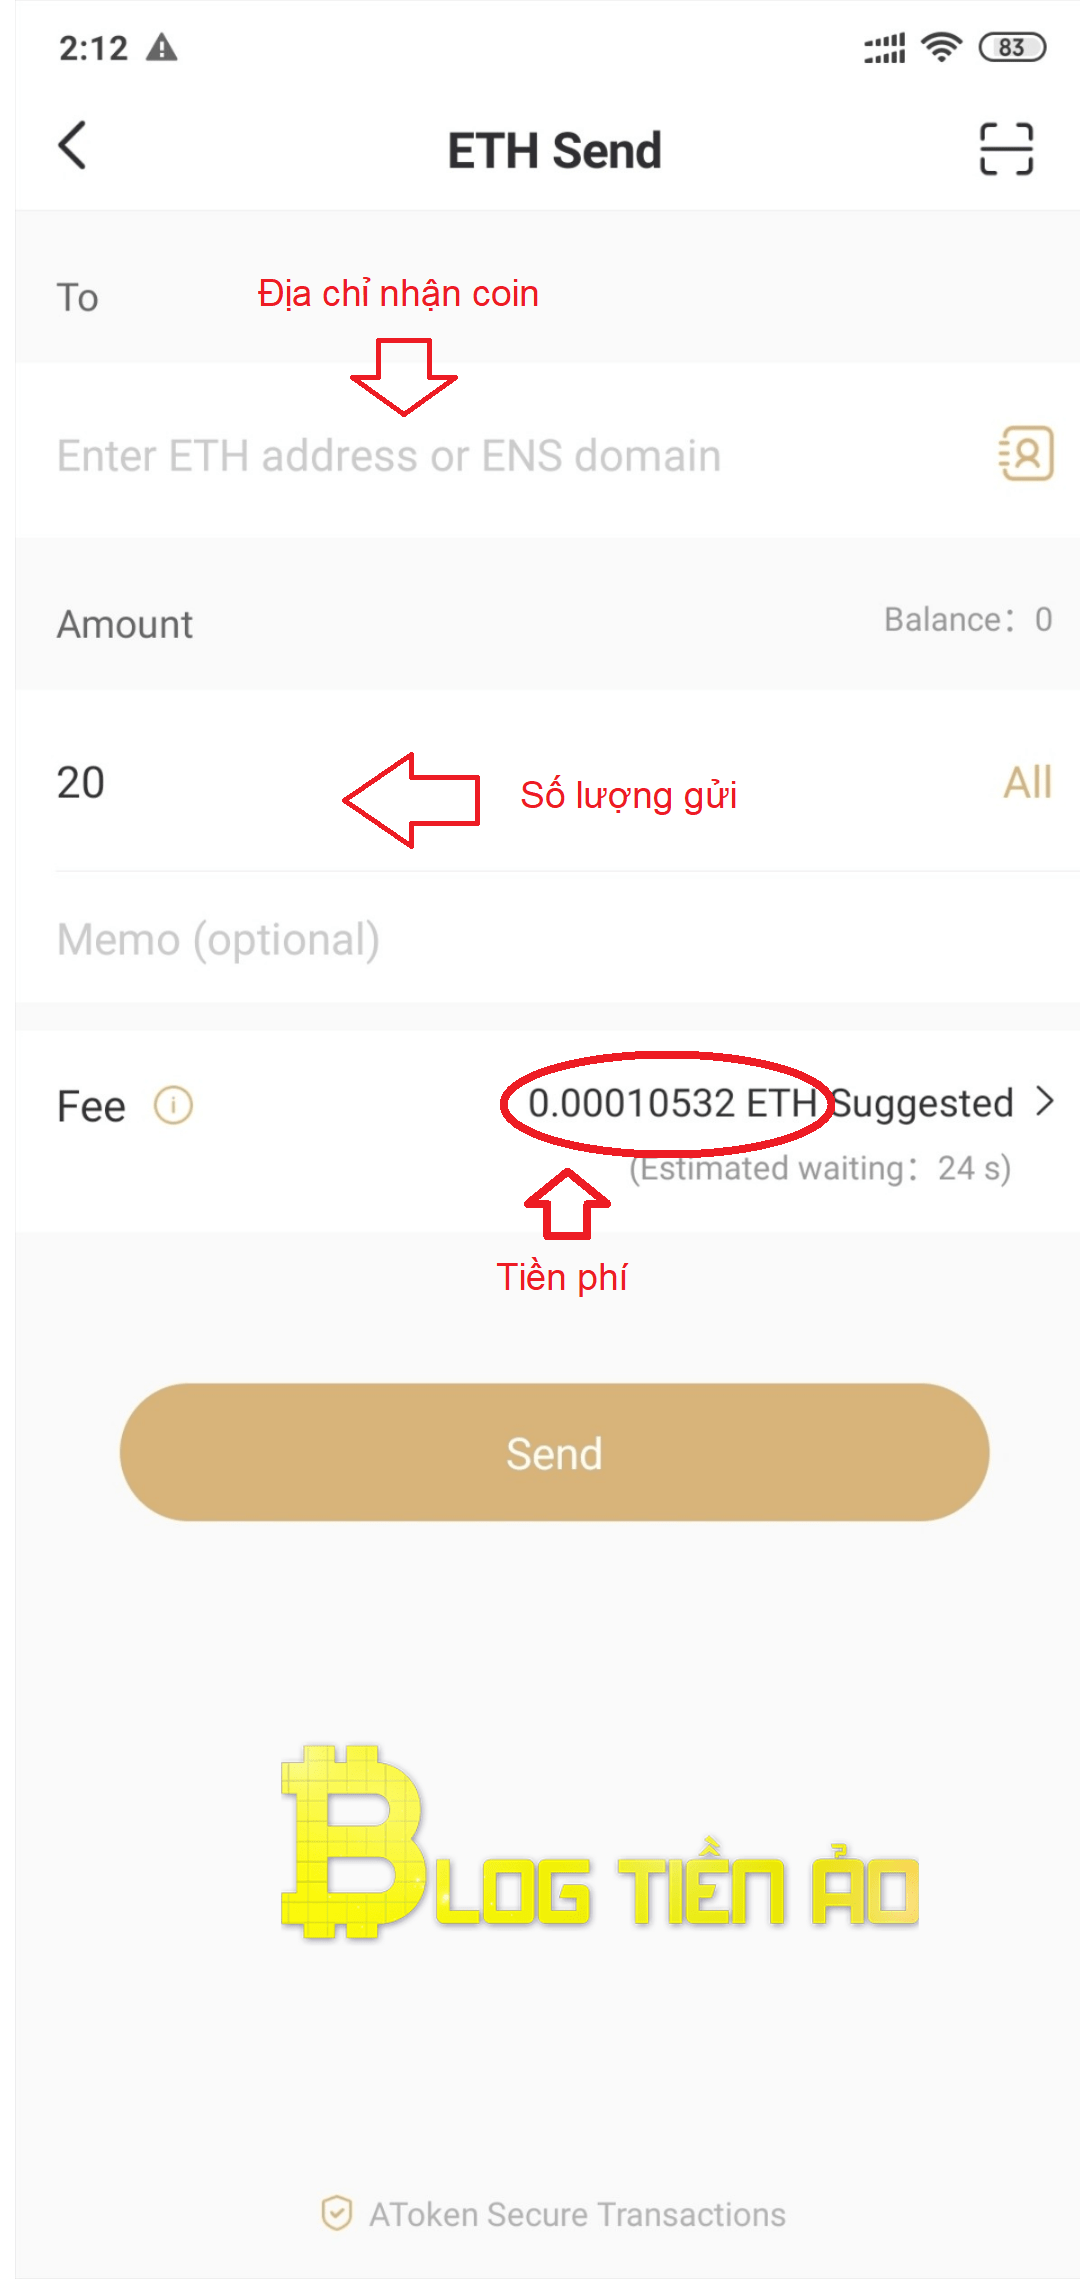 Enter the address and the amount of coins to transfer